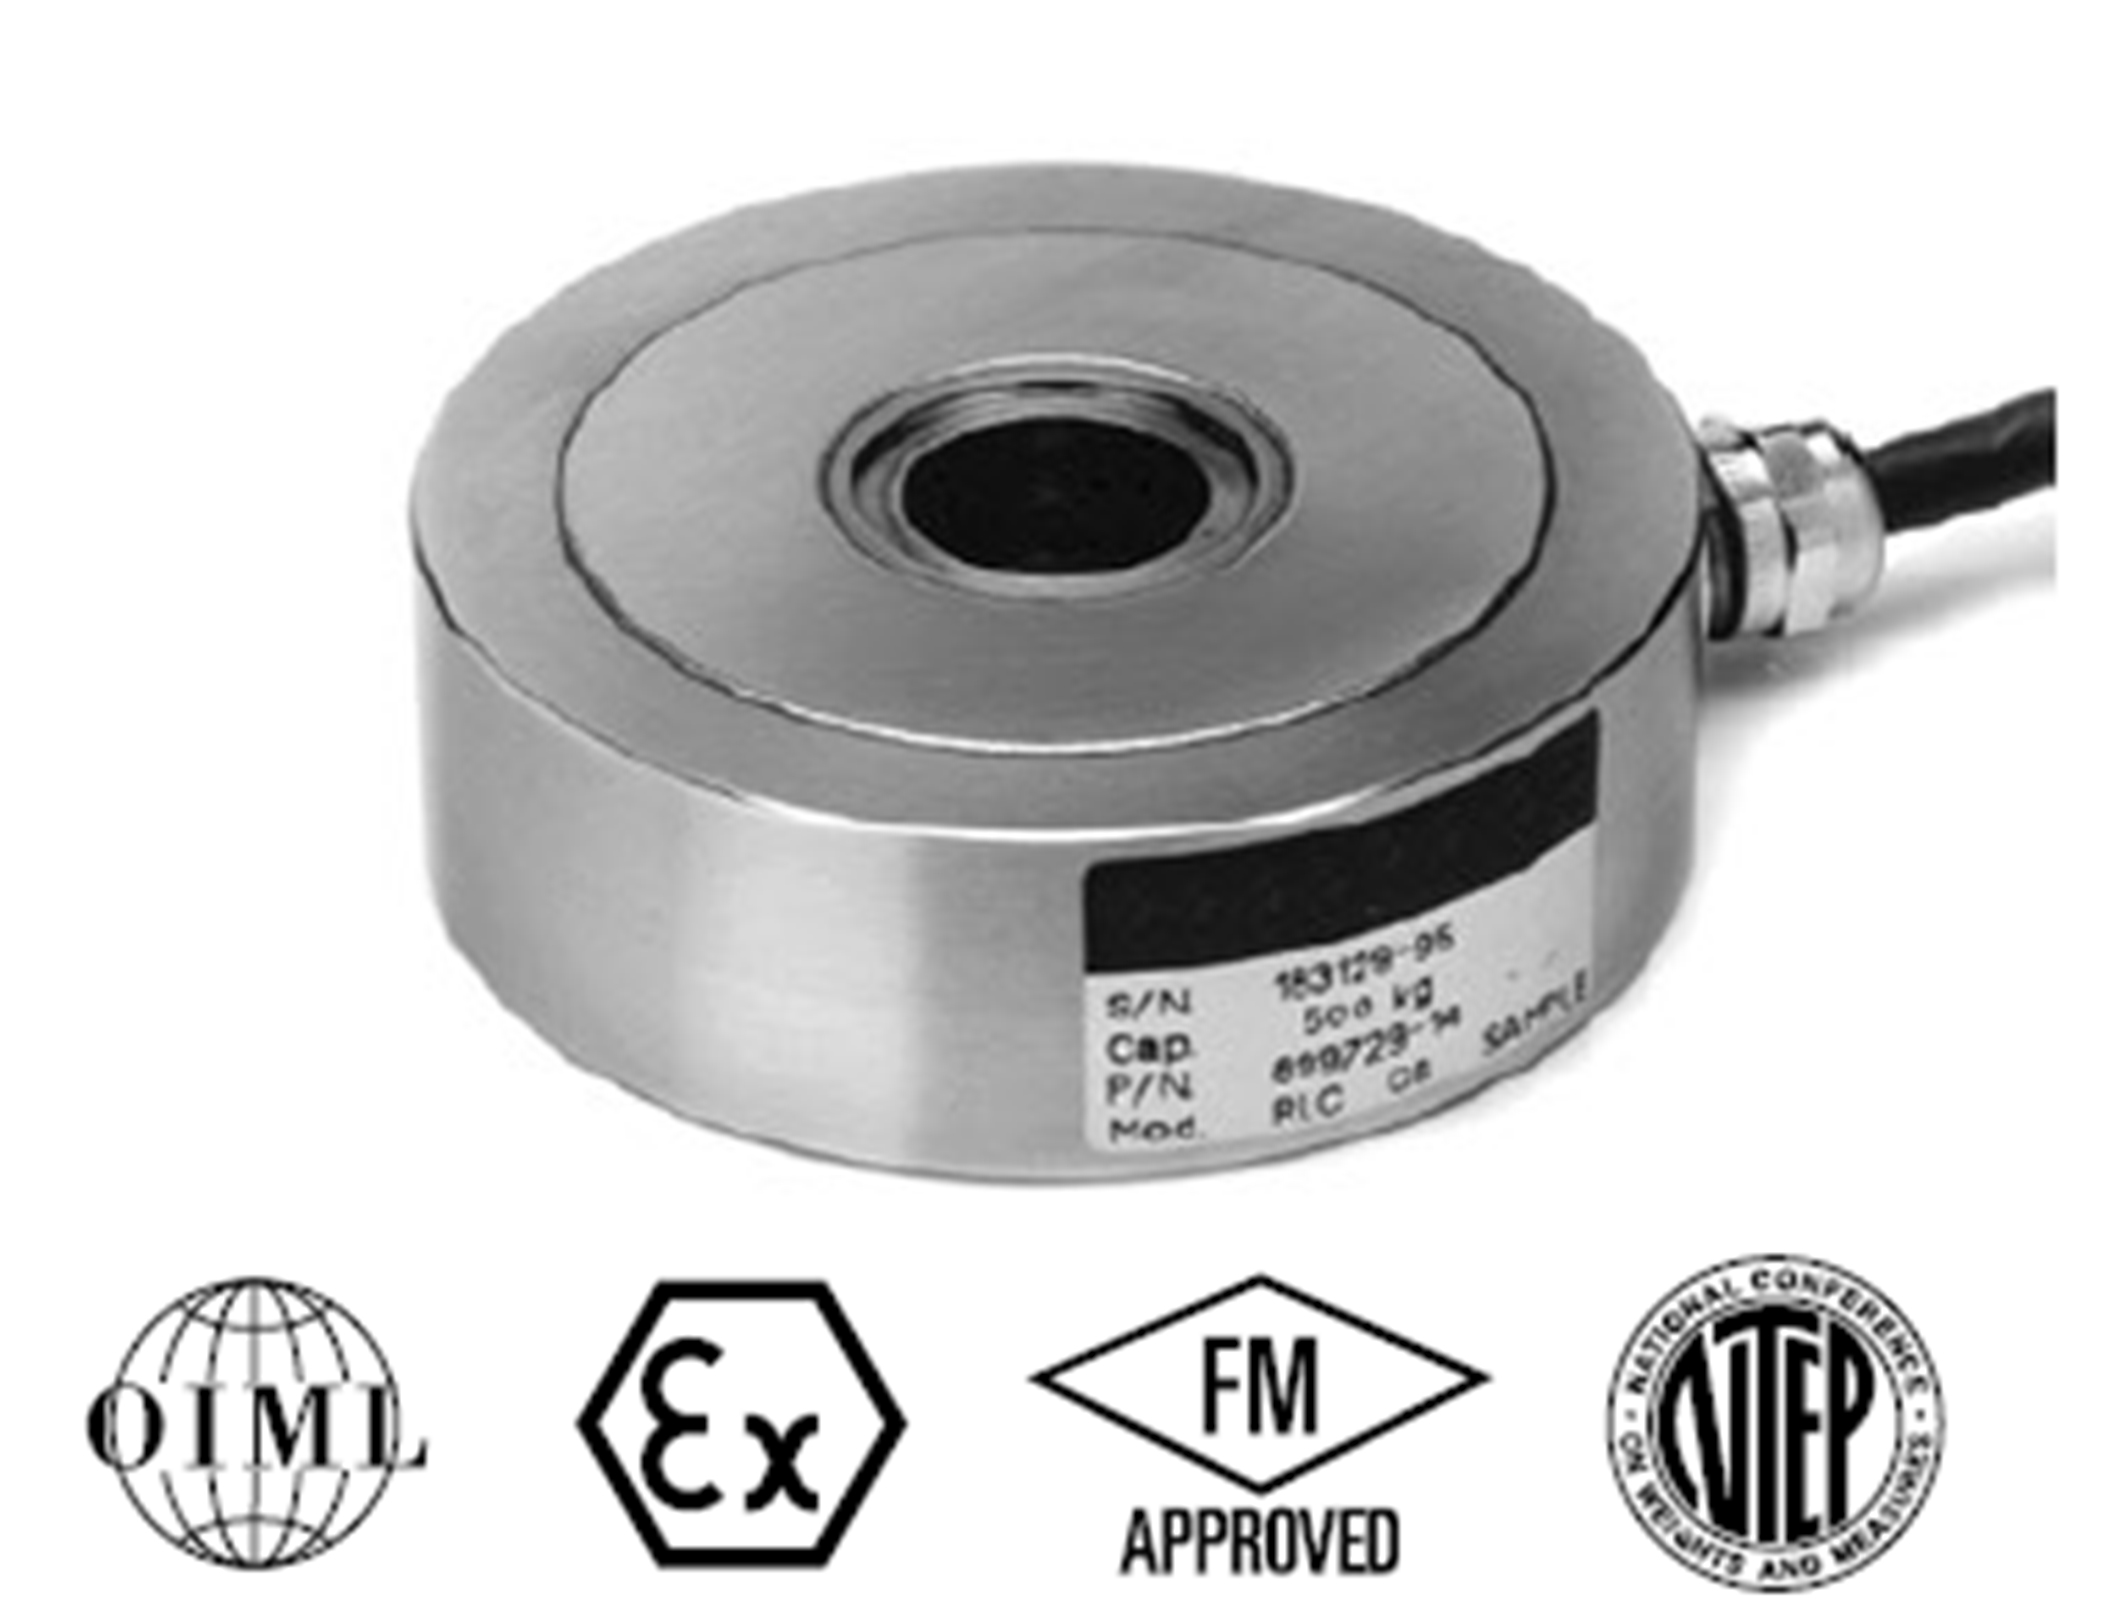 RLC load cell